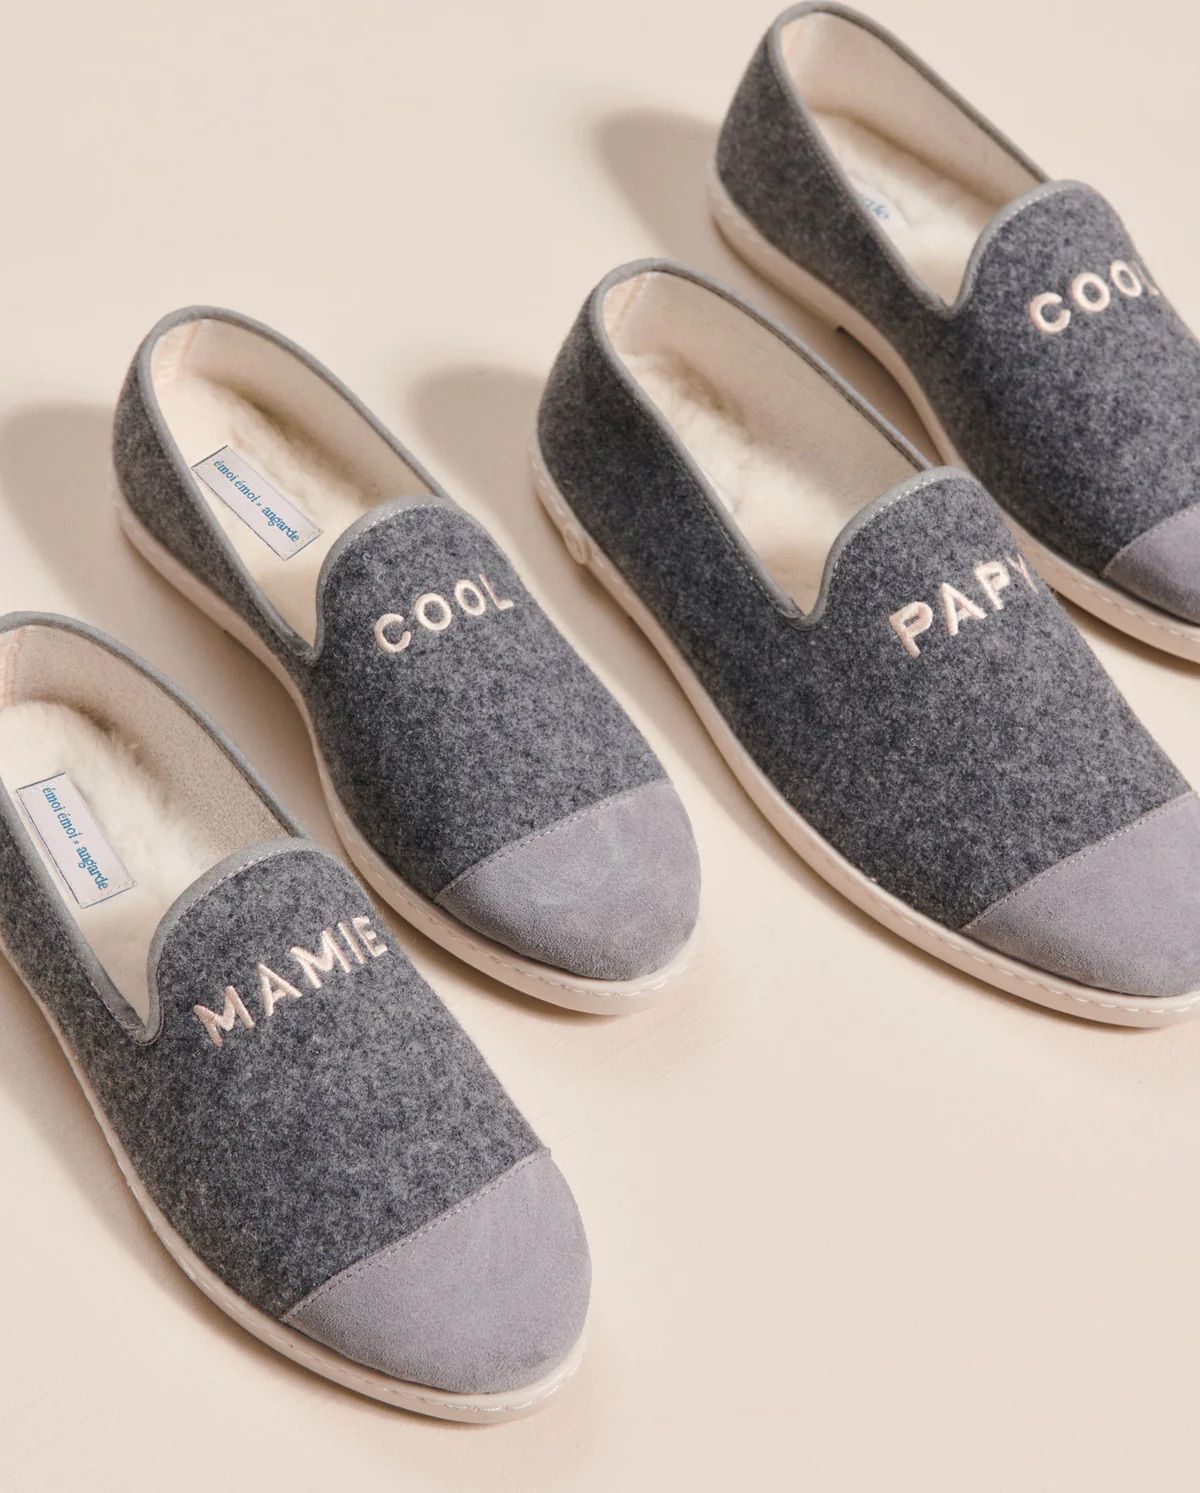 Papy Cool x emoi emoi slippers - Angarde